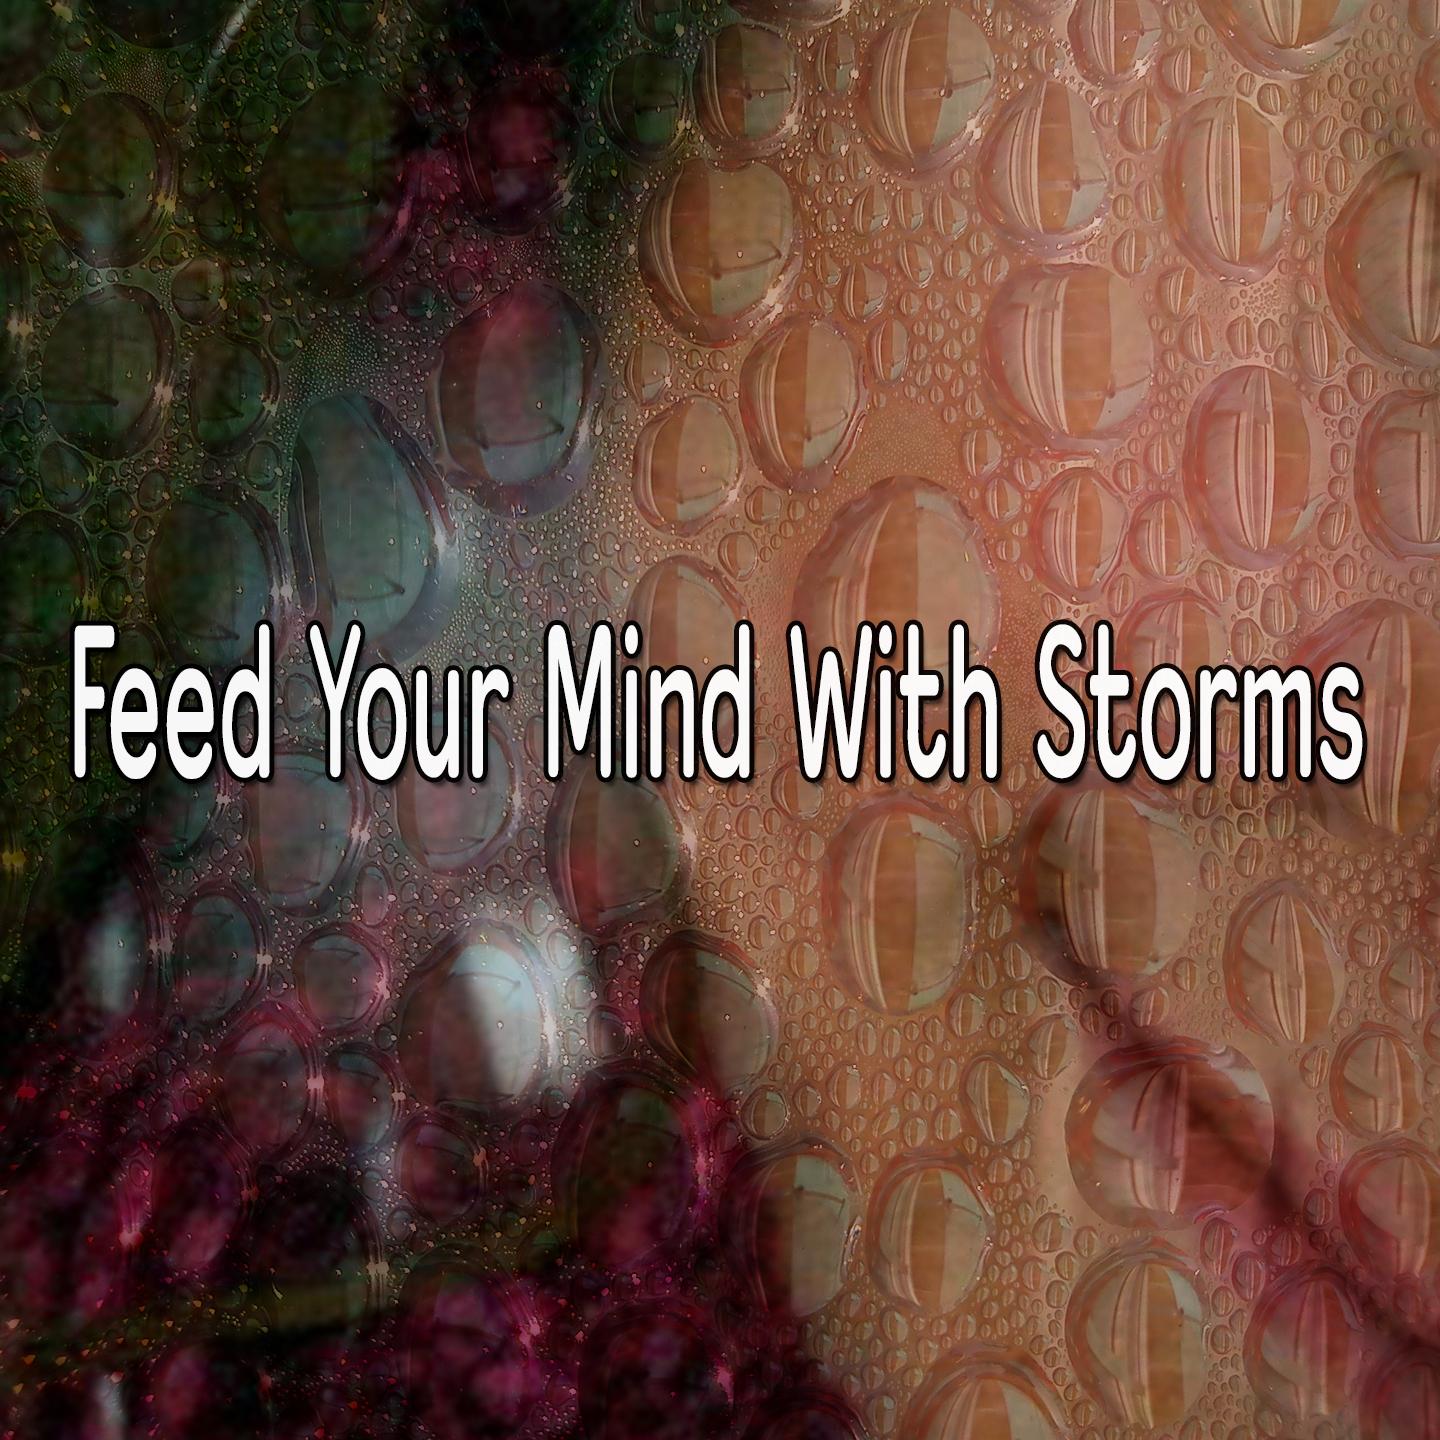 Feed Your Mind With Storms